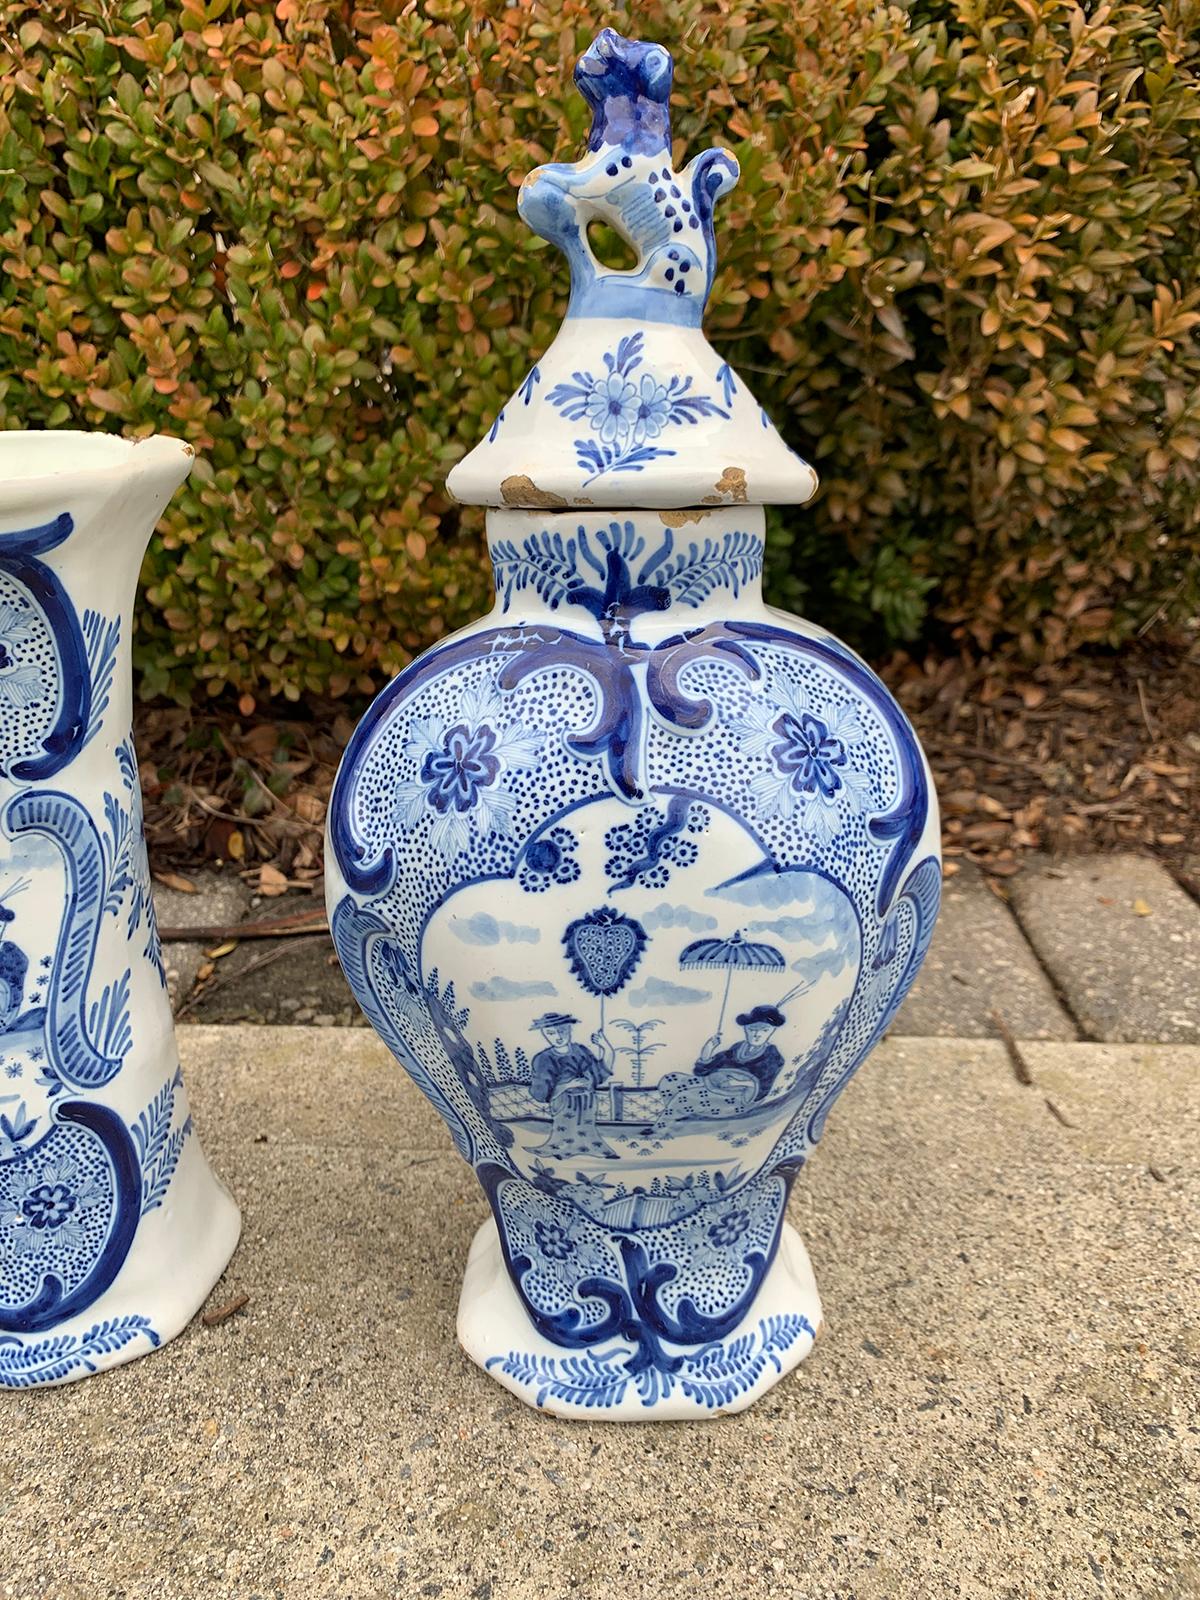 19th Century Five-Piece Delft-Style Blue and White Porcelain Garniture, Marked 1